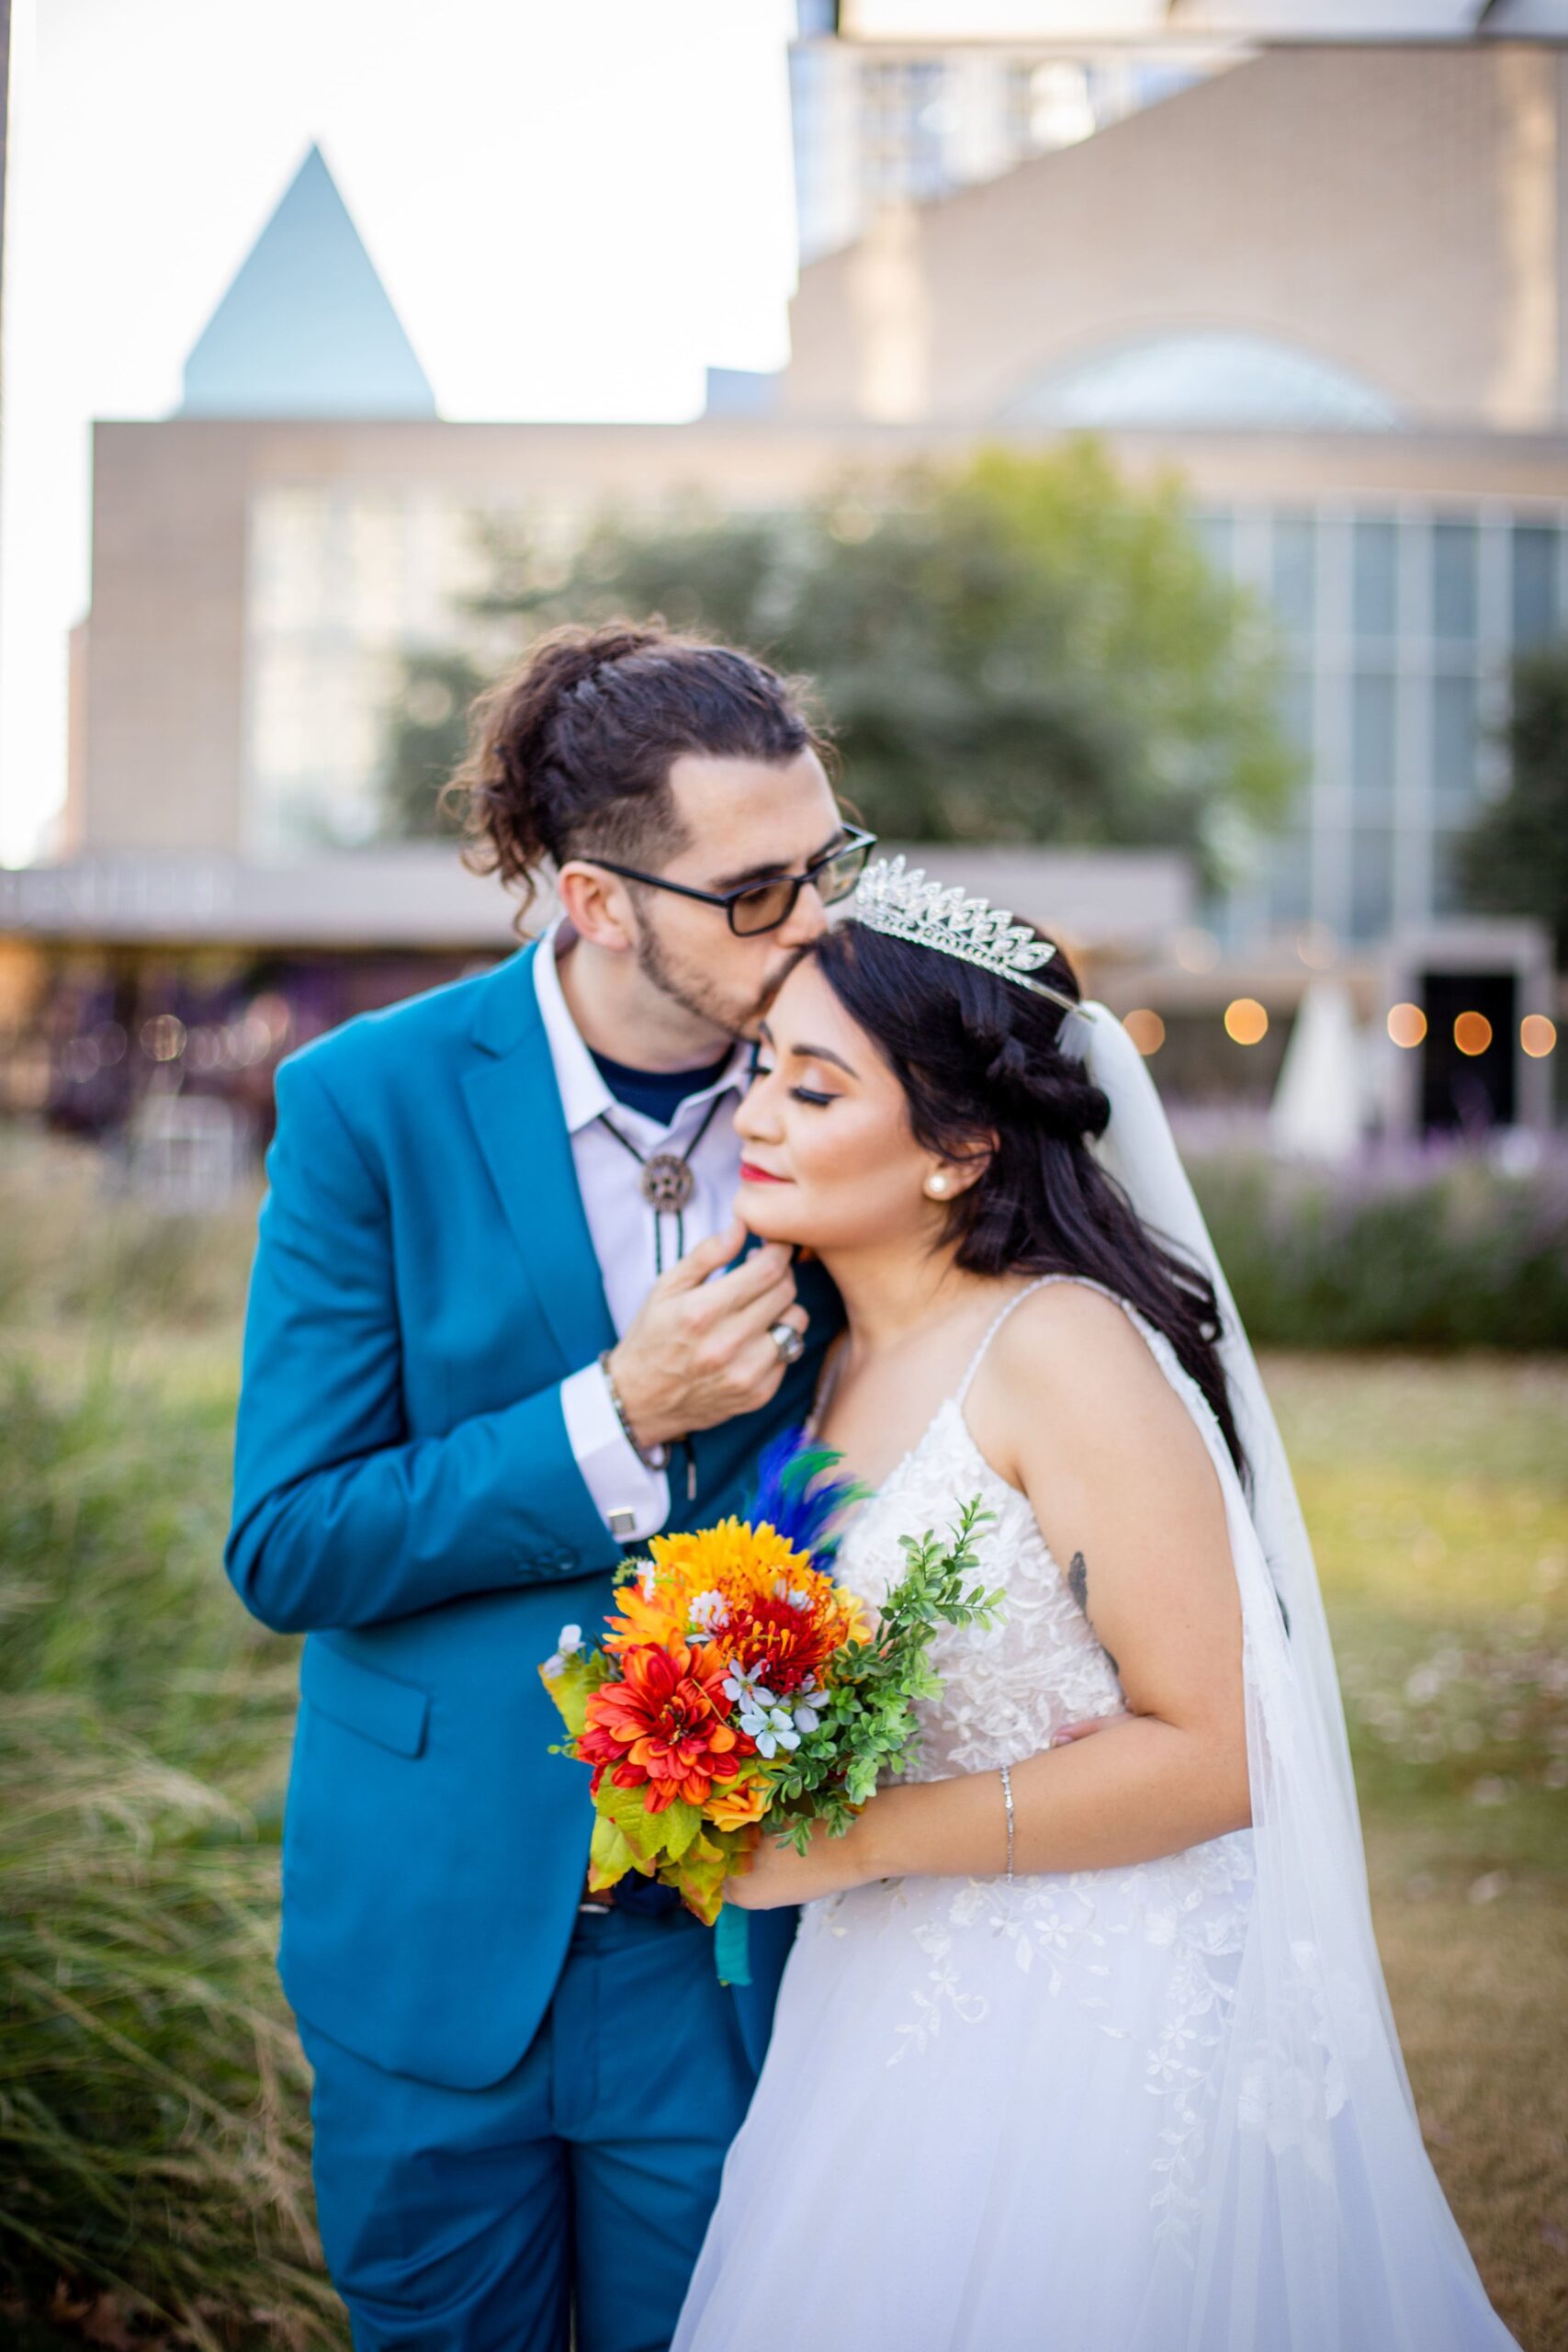 Scenic downtown Dallas wedding photography